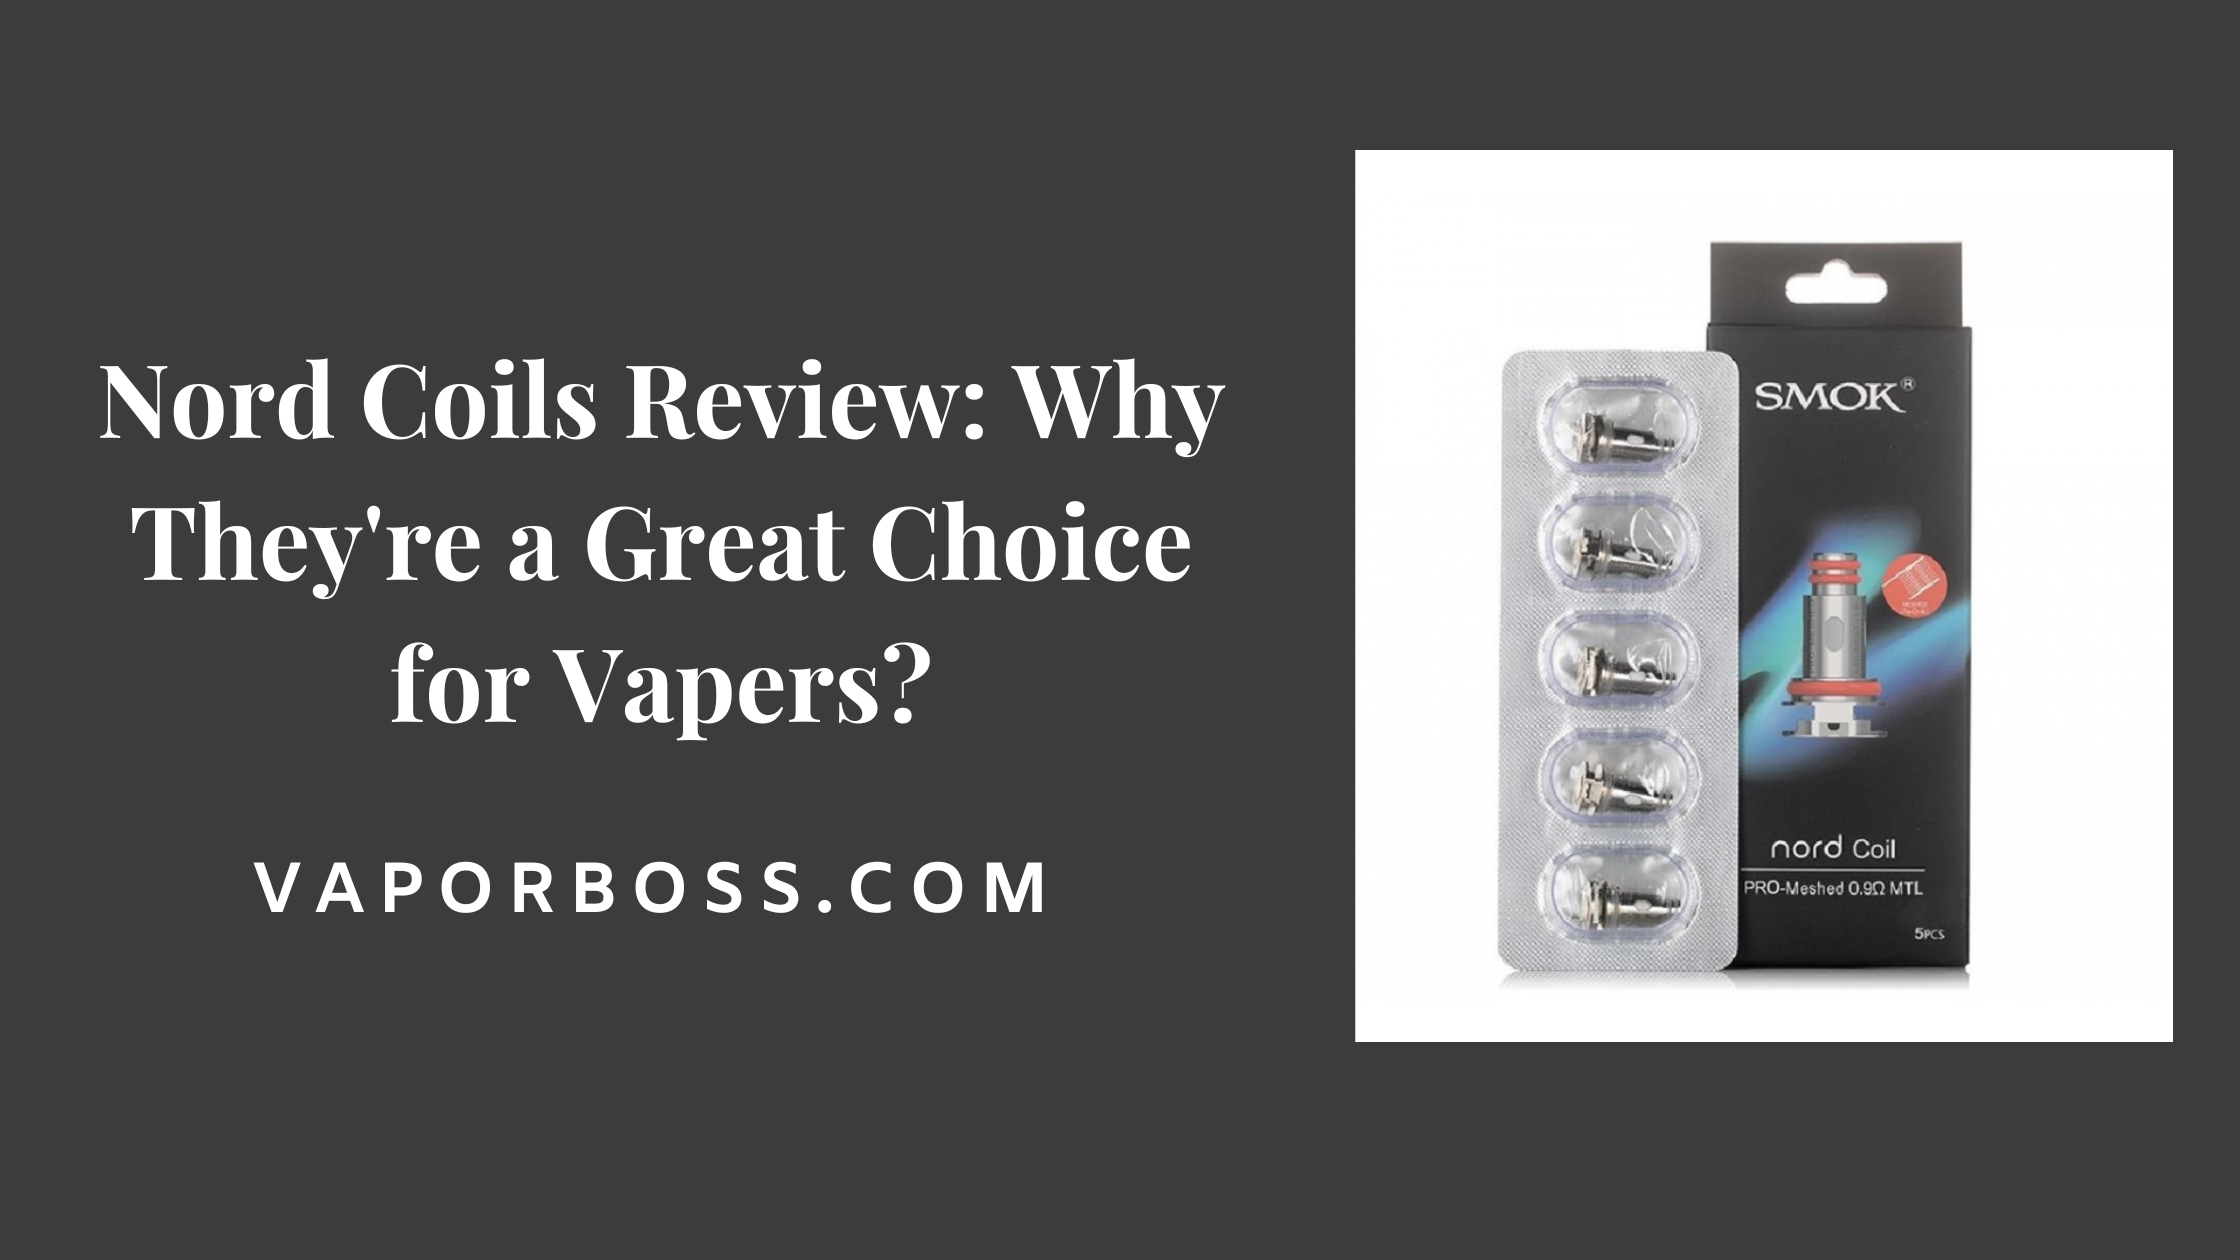 Nord Coils Review: Why They're a Great Choice for Vapers?